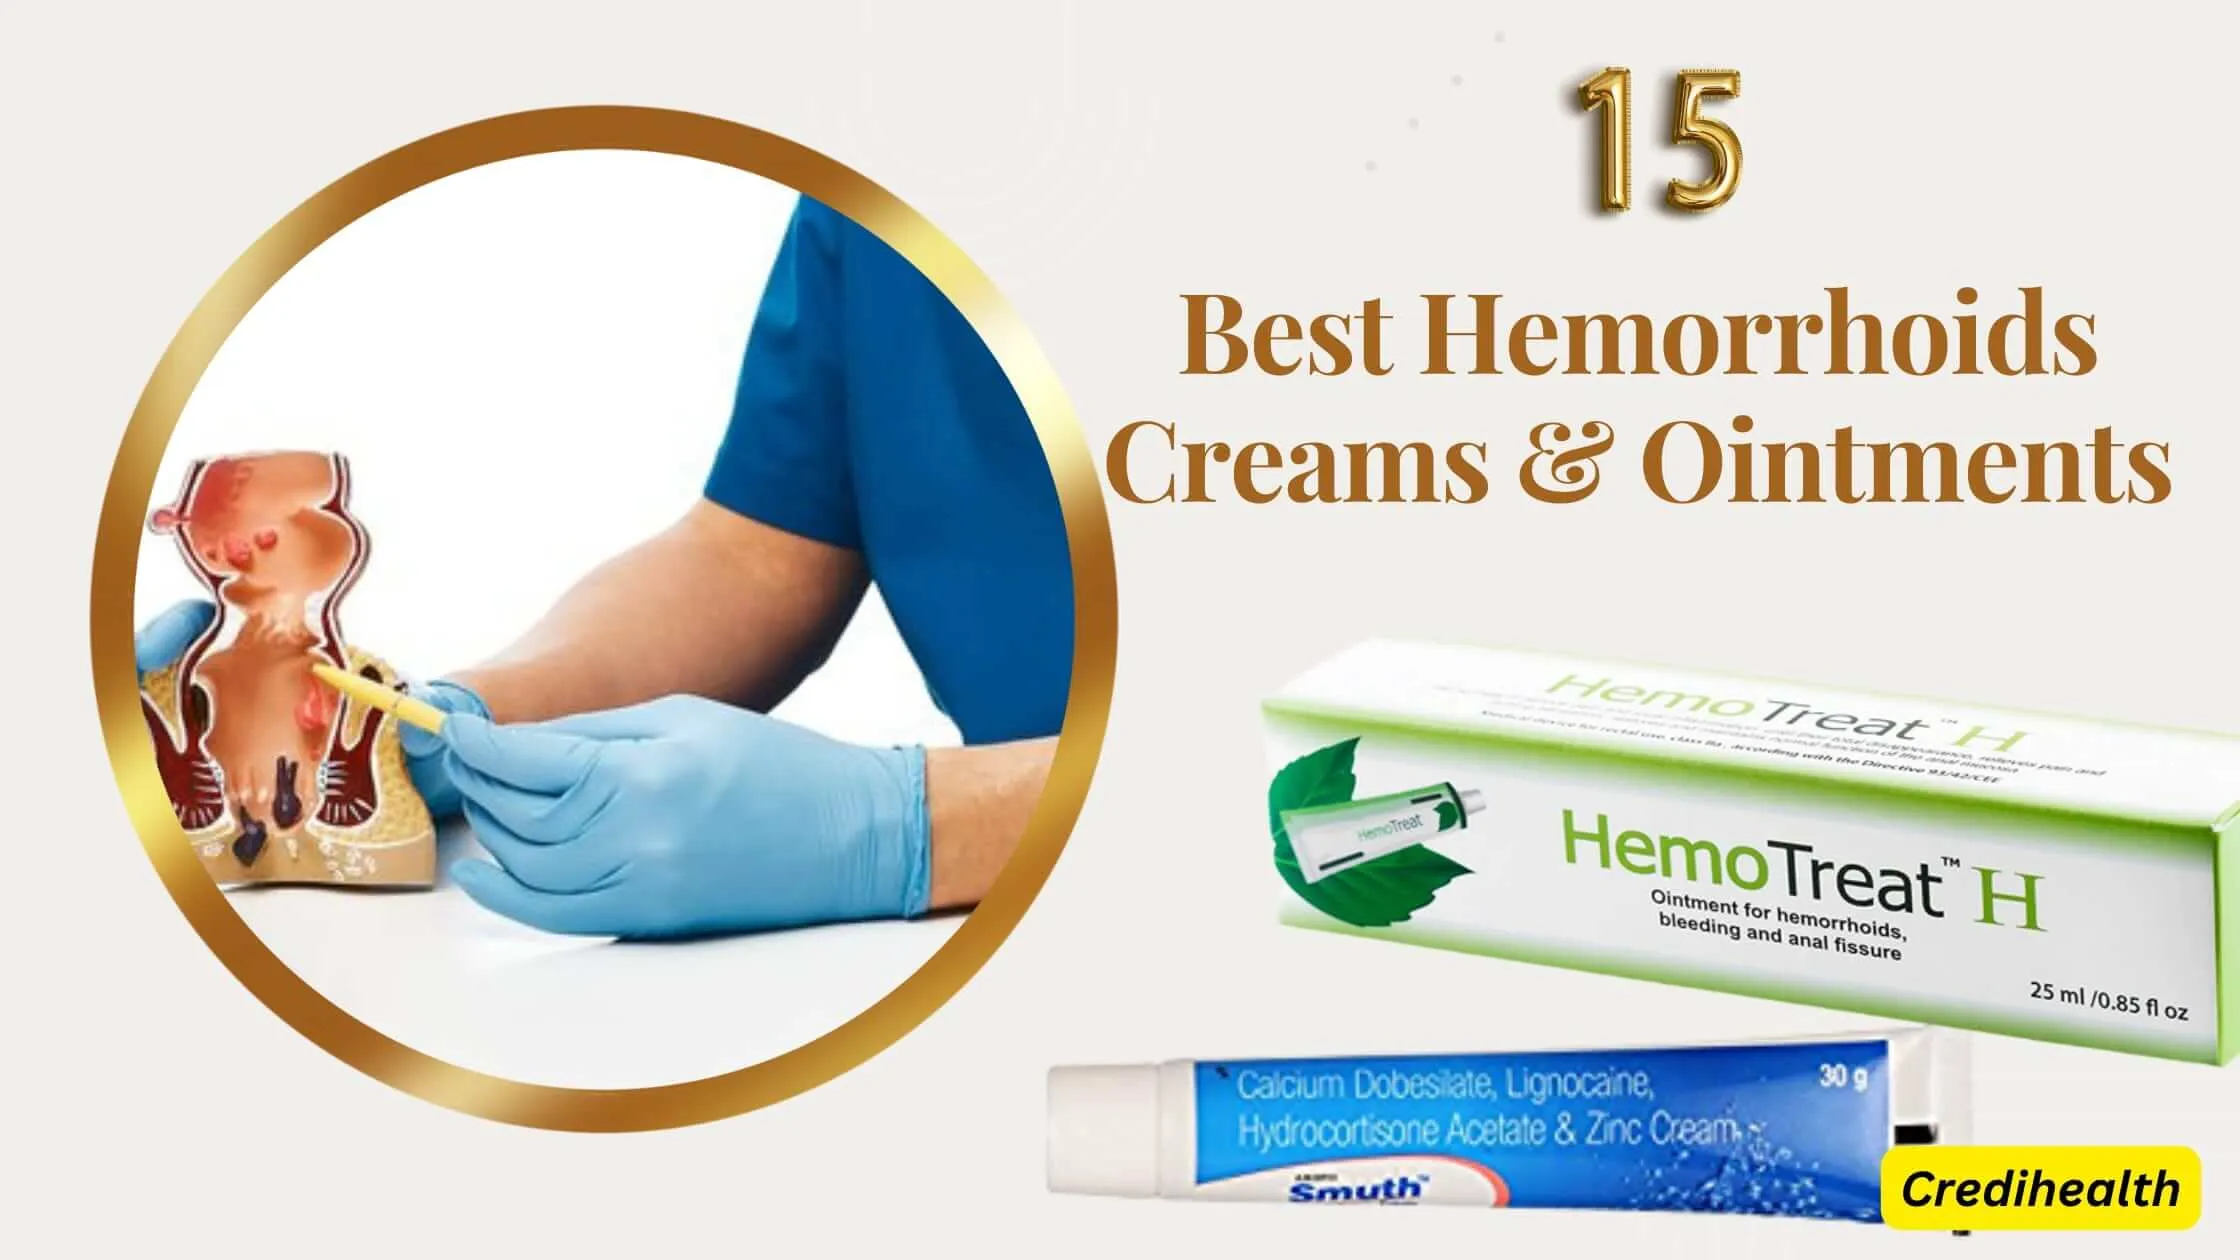 The Best 15 Hemorrhoids Creams & Ointments of 2023